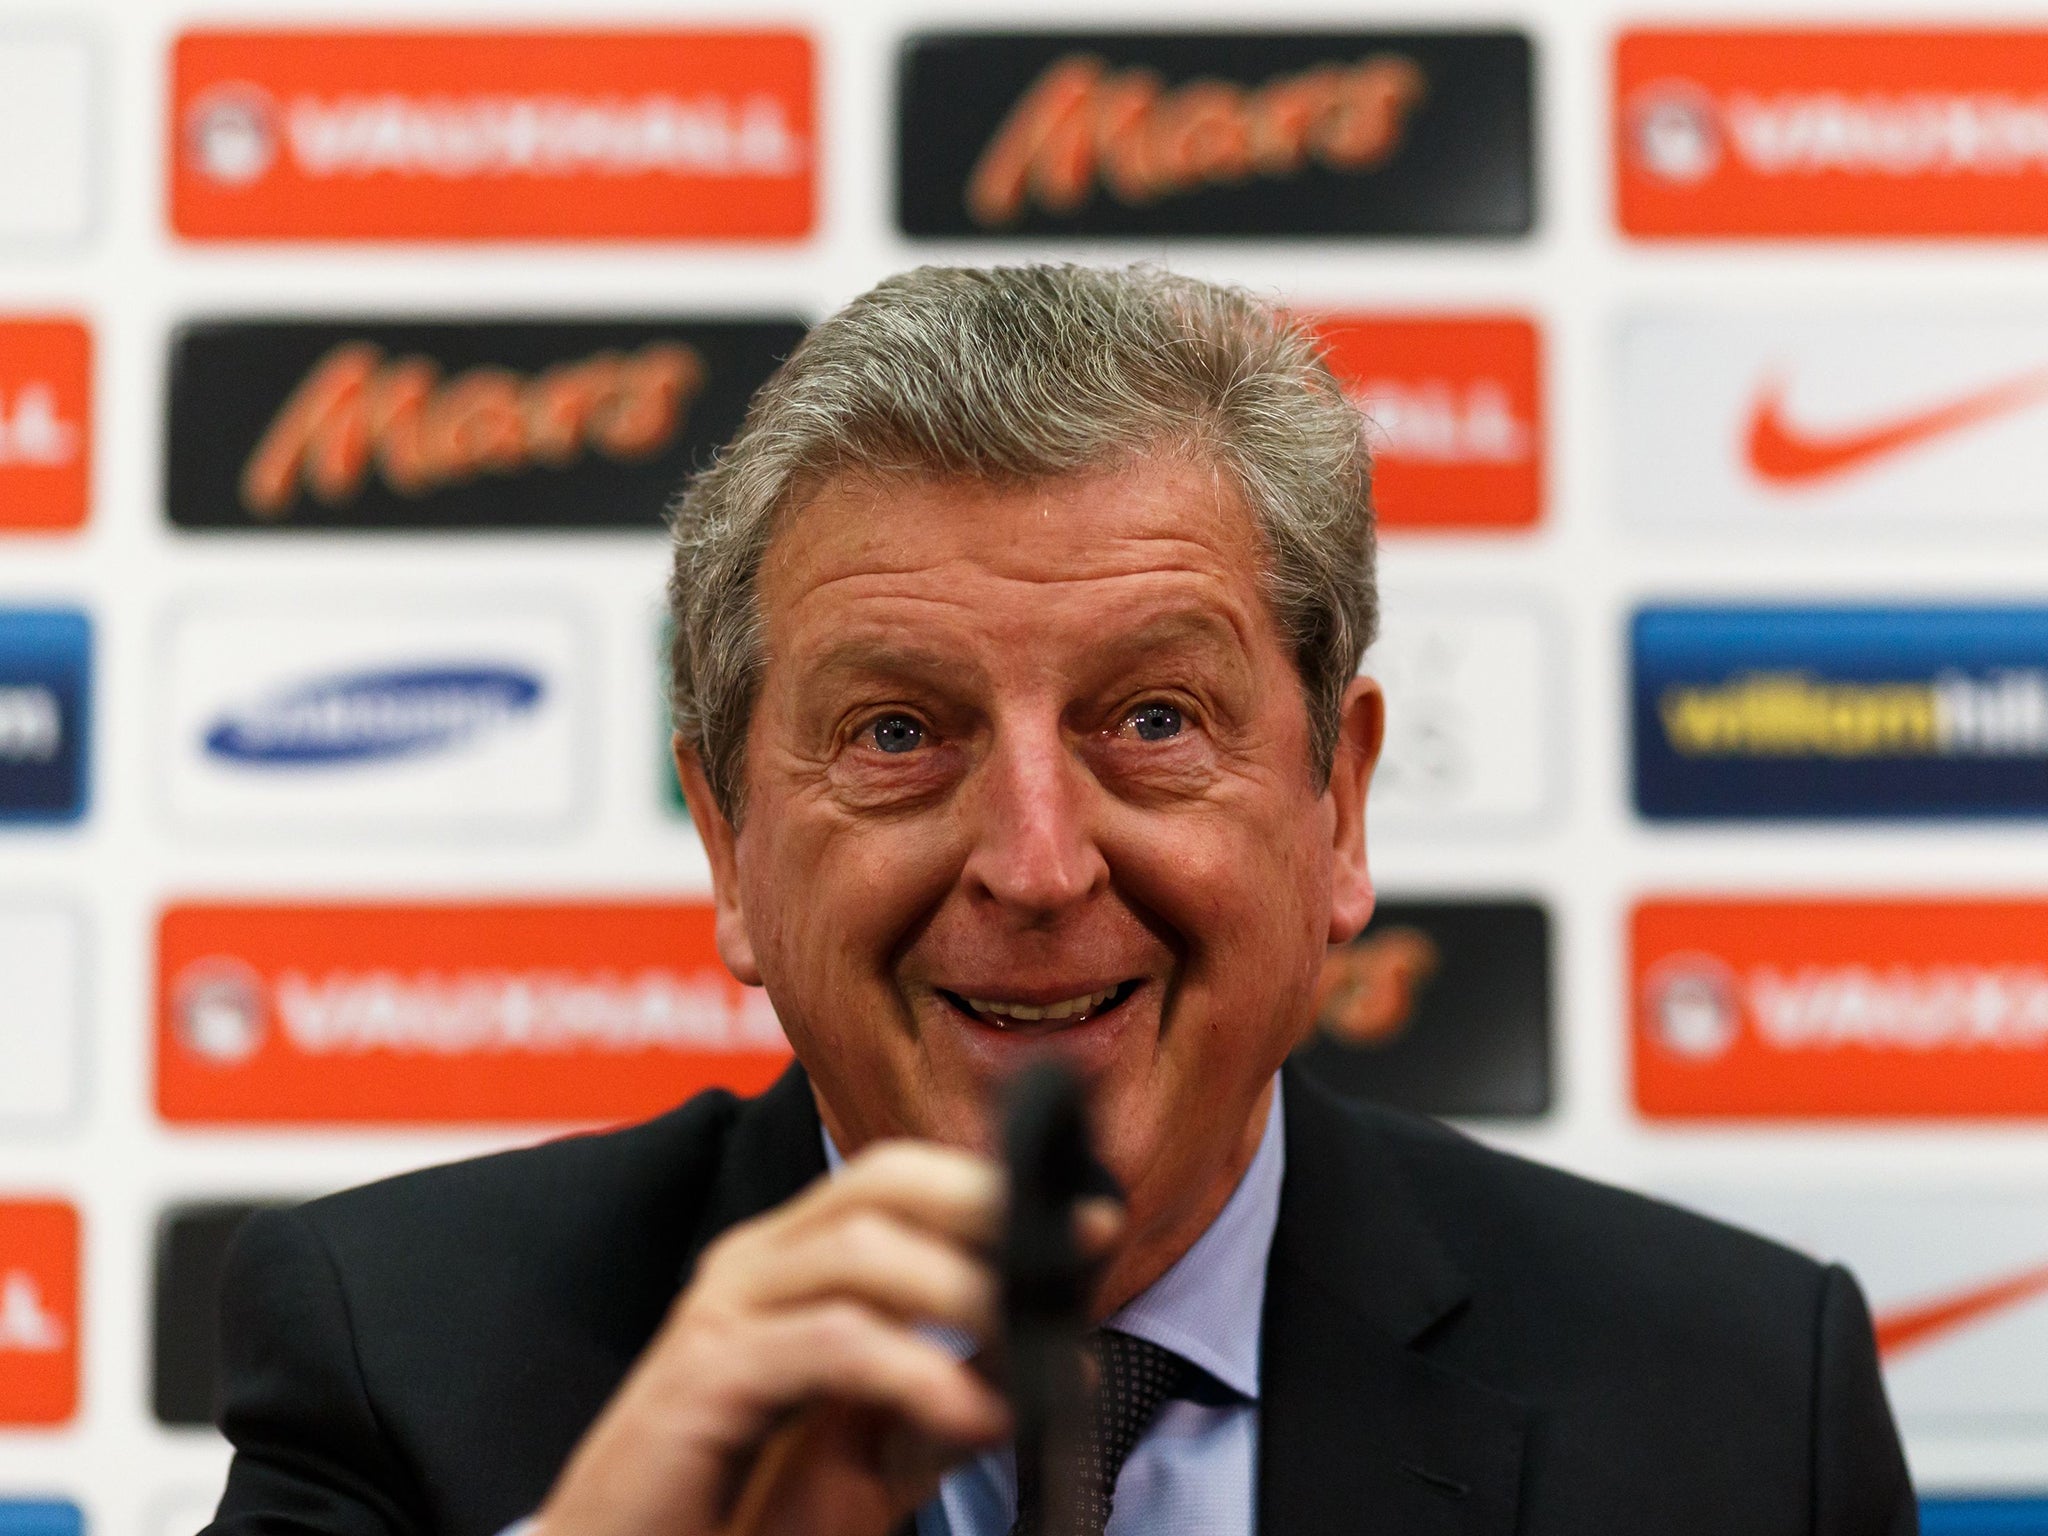 Roy Hodgson wants to continue as England manager for another two years beyond next summer